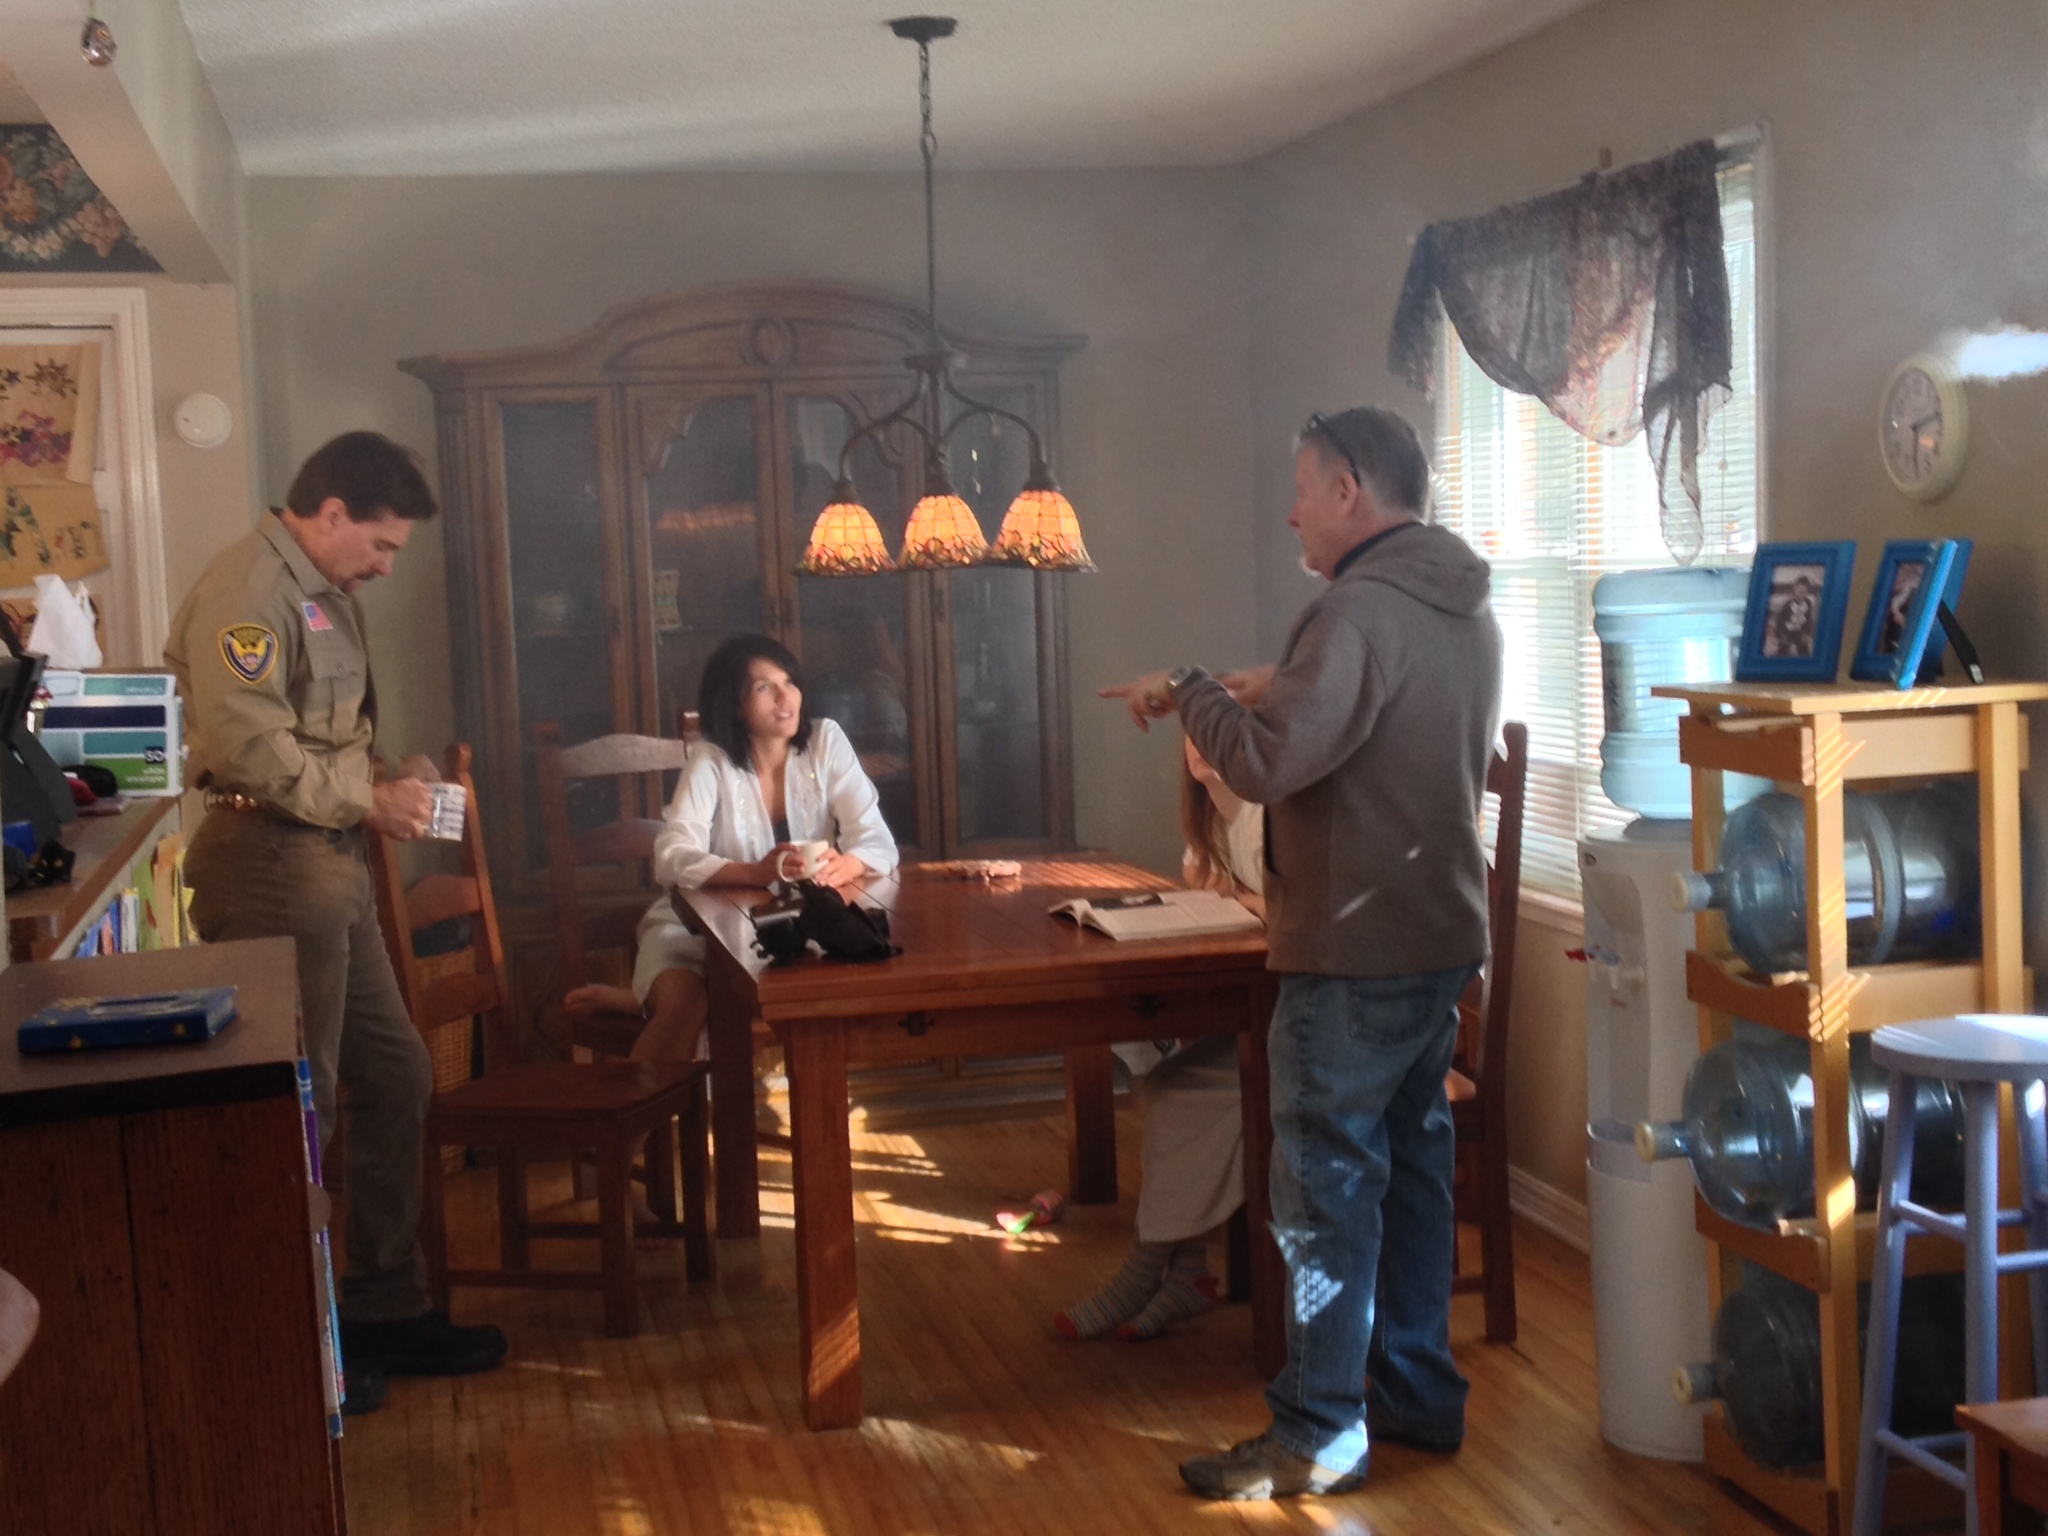 Jim Long directs Carl Bailey, Lindsey McCollough and Victoria Fox on the set of THE PHONE IN THE ATTIC.